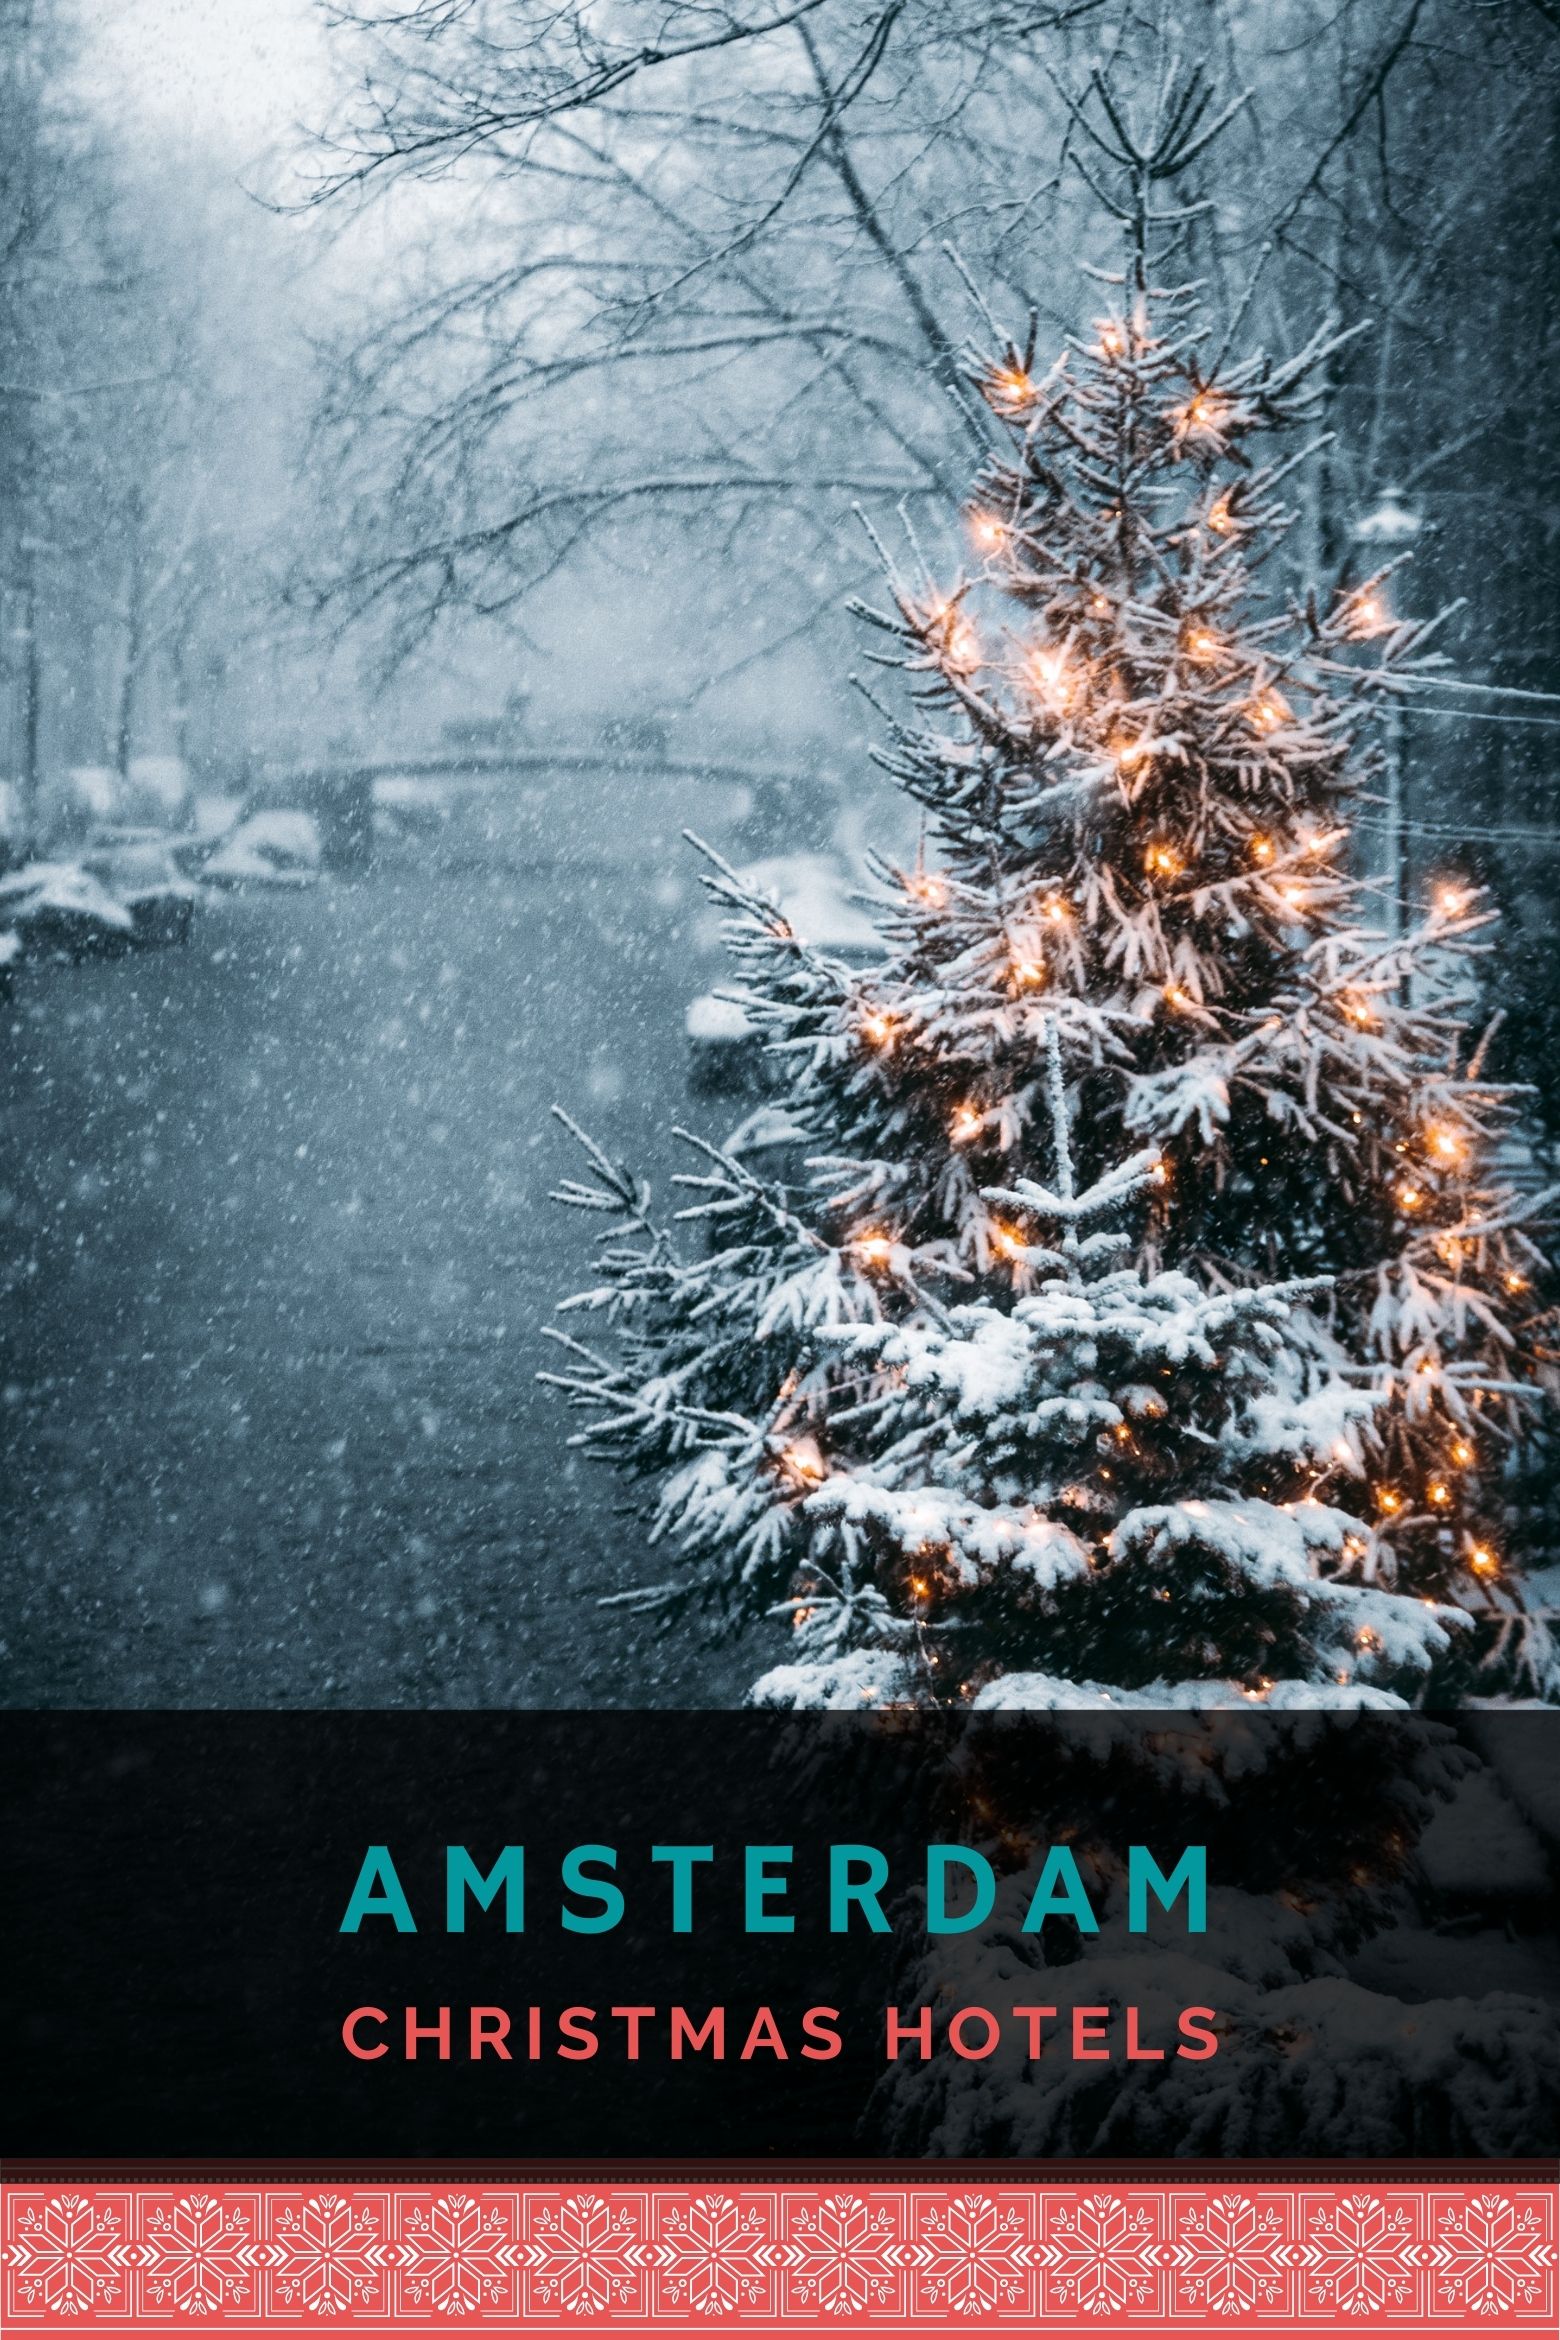 Amsterdam canal during the snow with a Christmas tree and lights